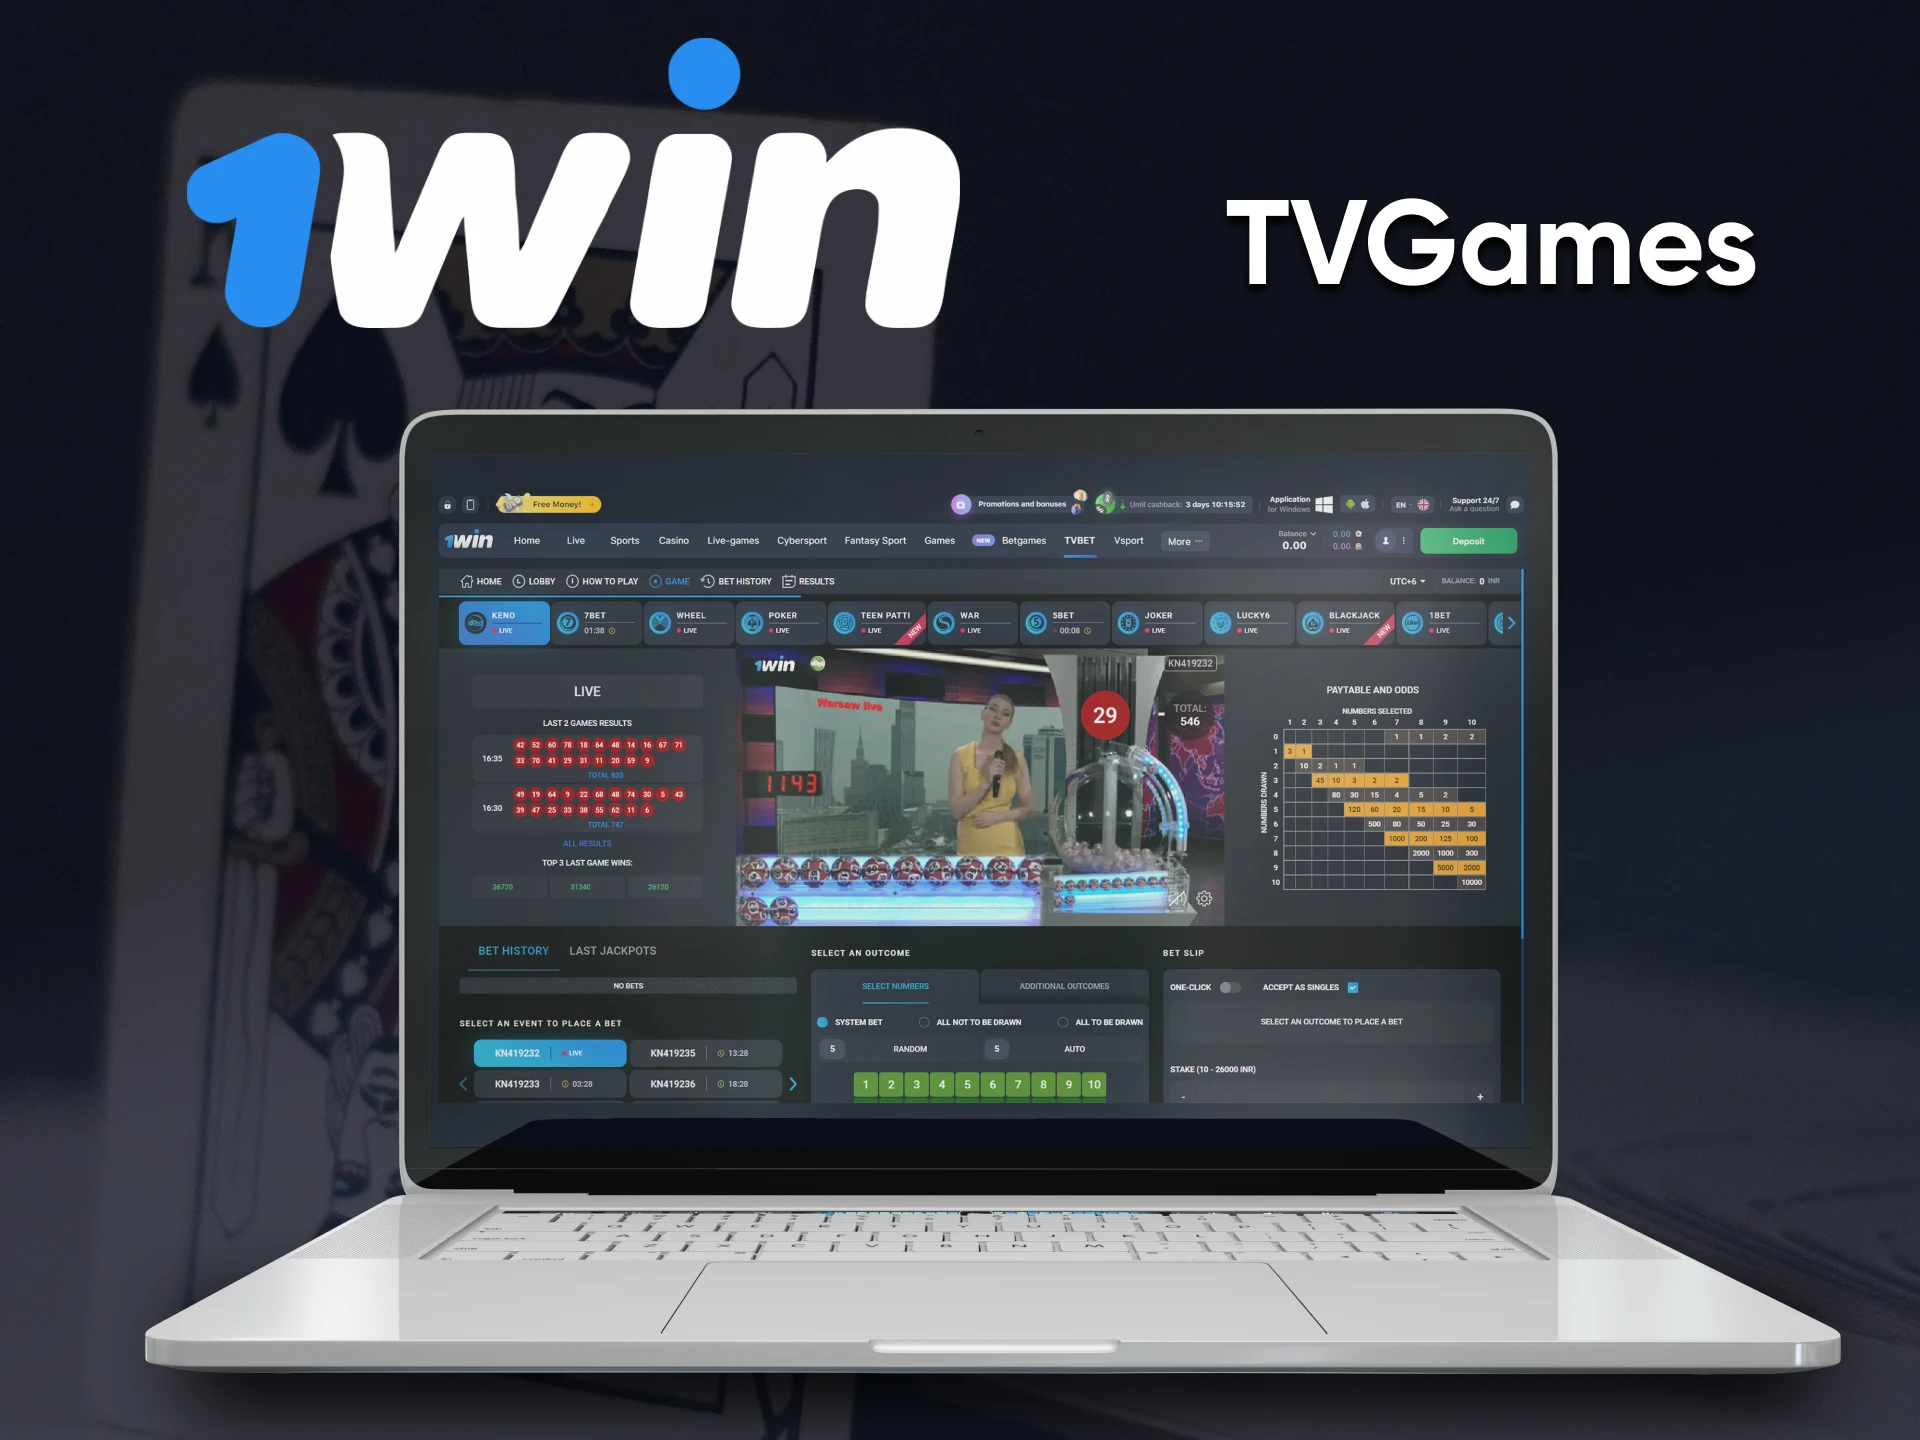 For games on 1win you can choose the TVGames.